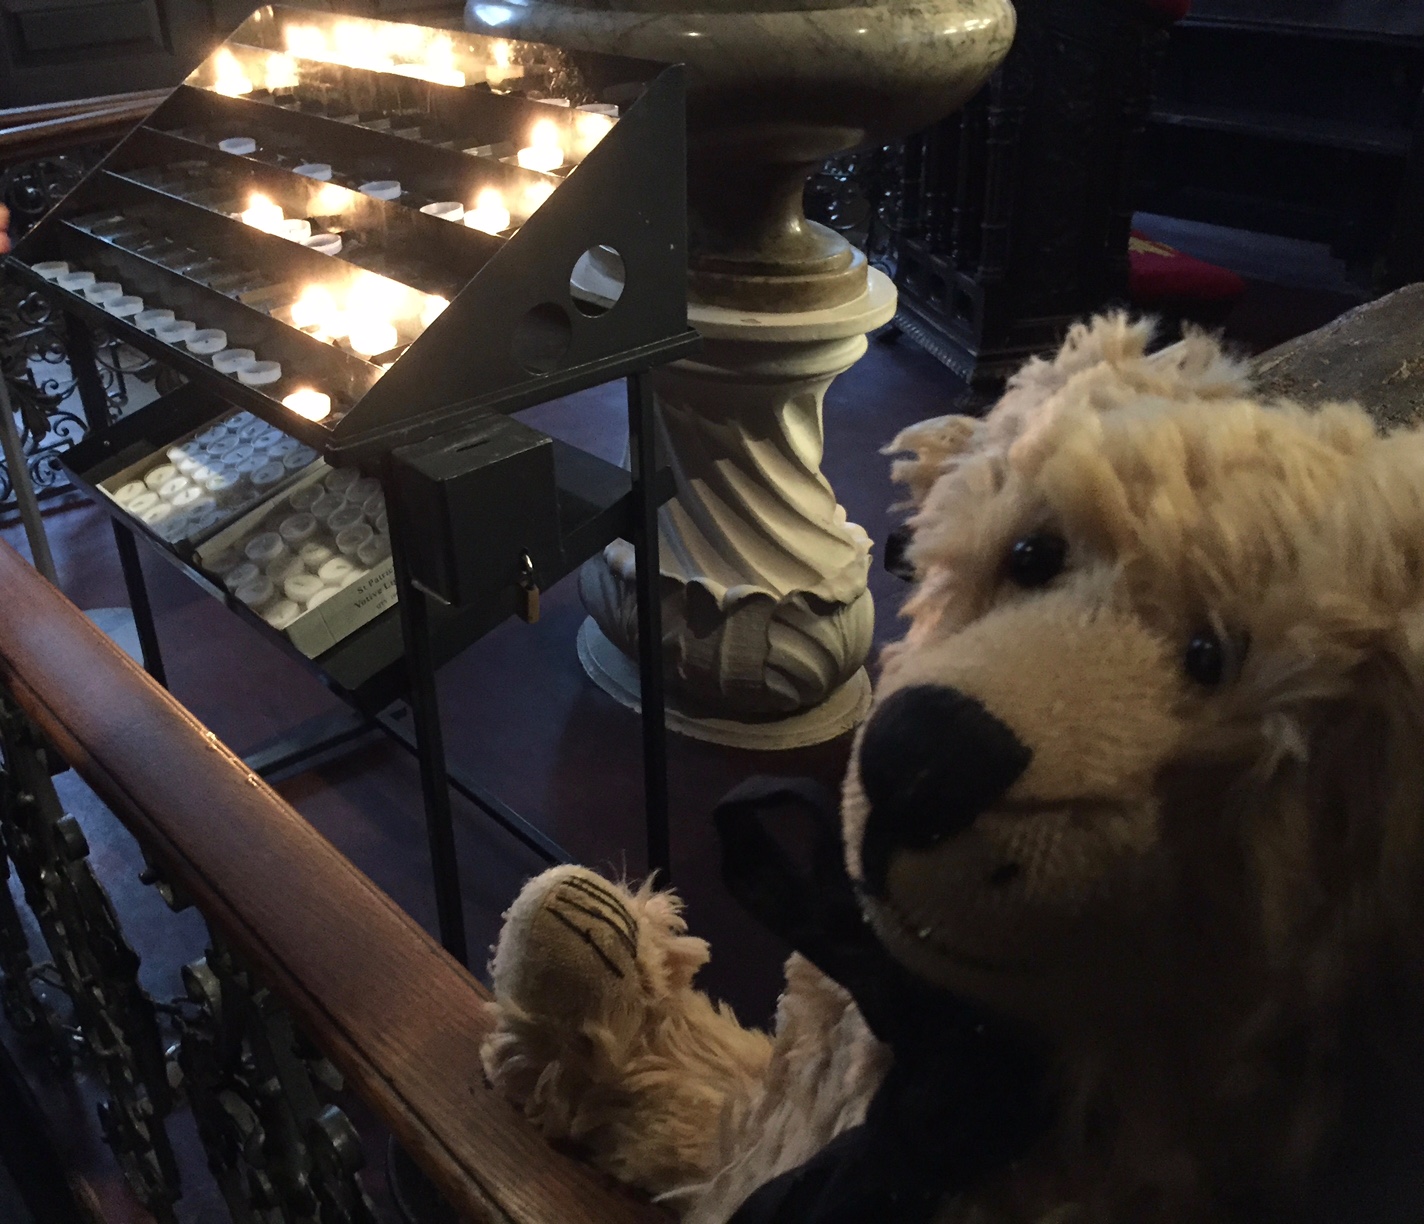 Joe's Story: Lighting a Candle for Diddley.